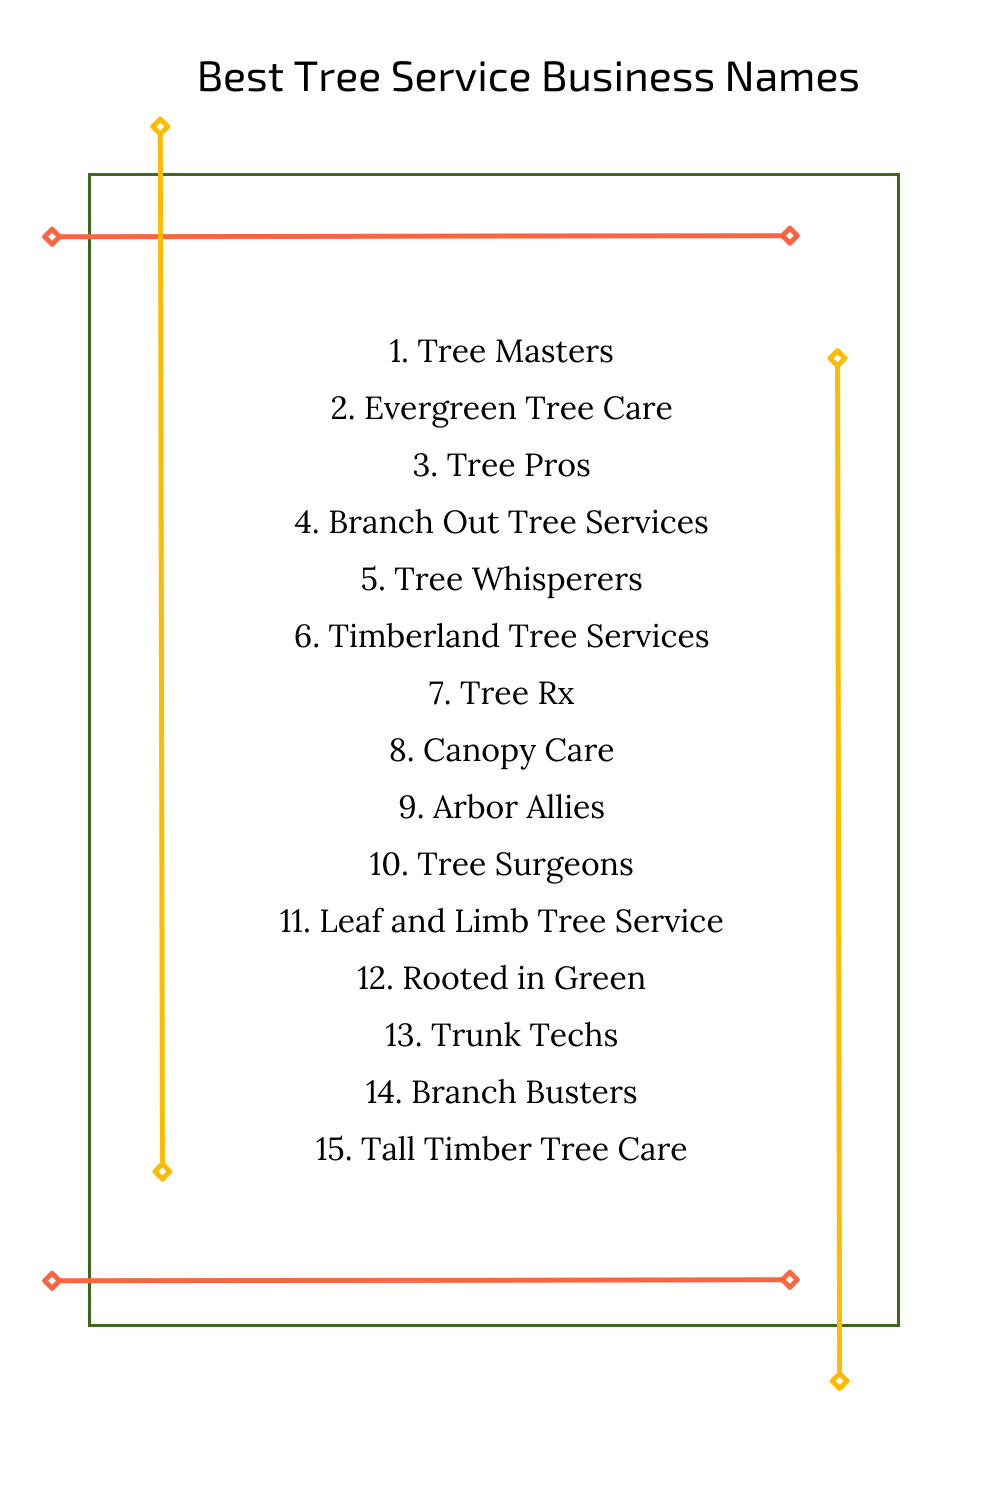 Best Tree Service Business Names